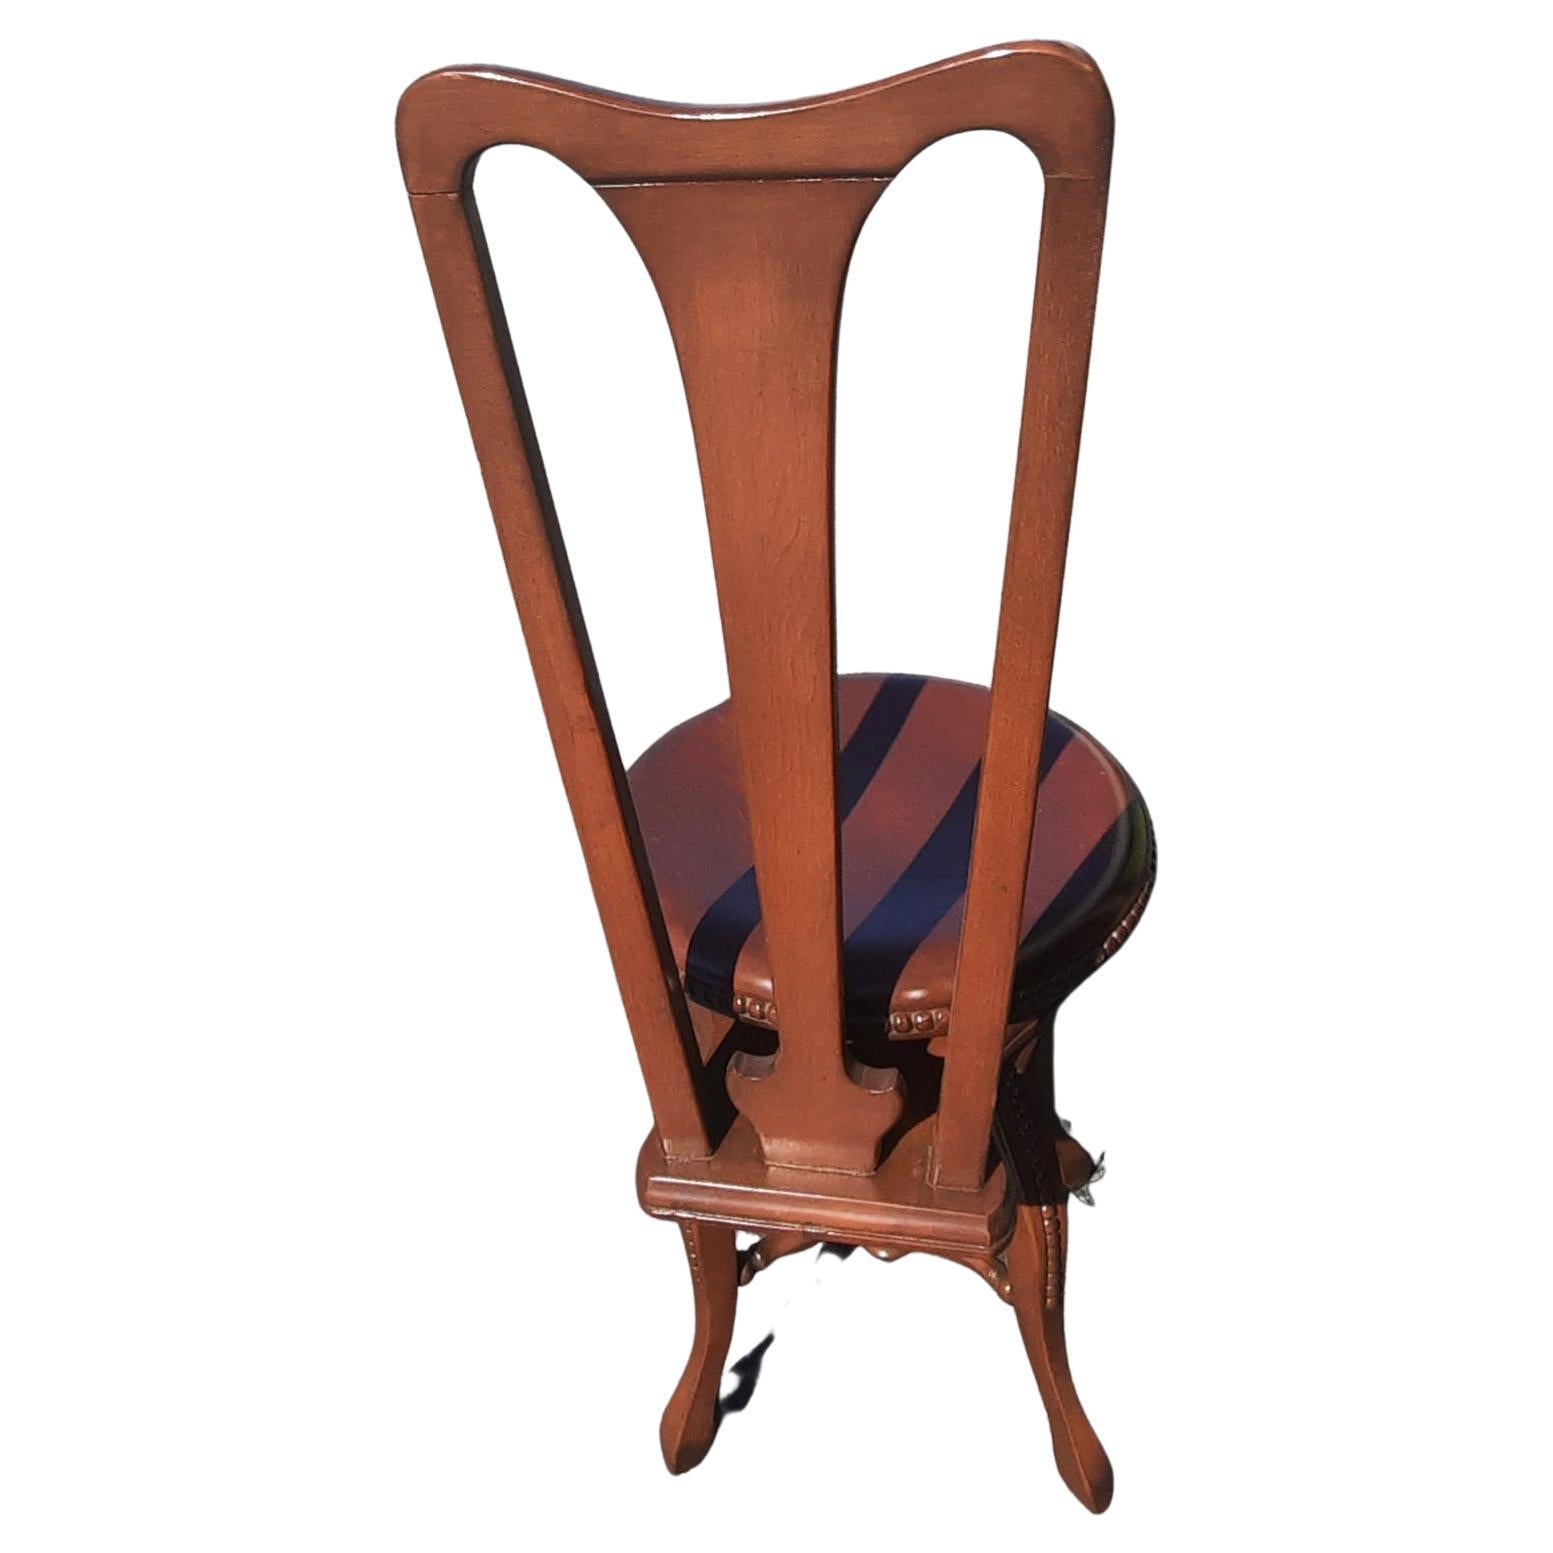 Antique Carved Mahogany Adjustable Seat Height Piano Chair Music Room Stool In Good Condition For Sale In Germantown, MD